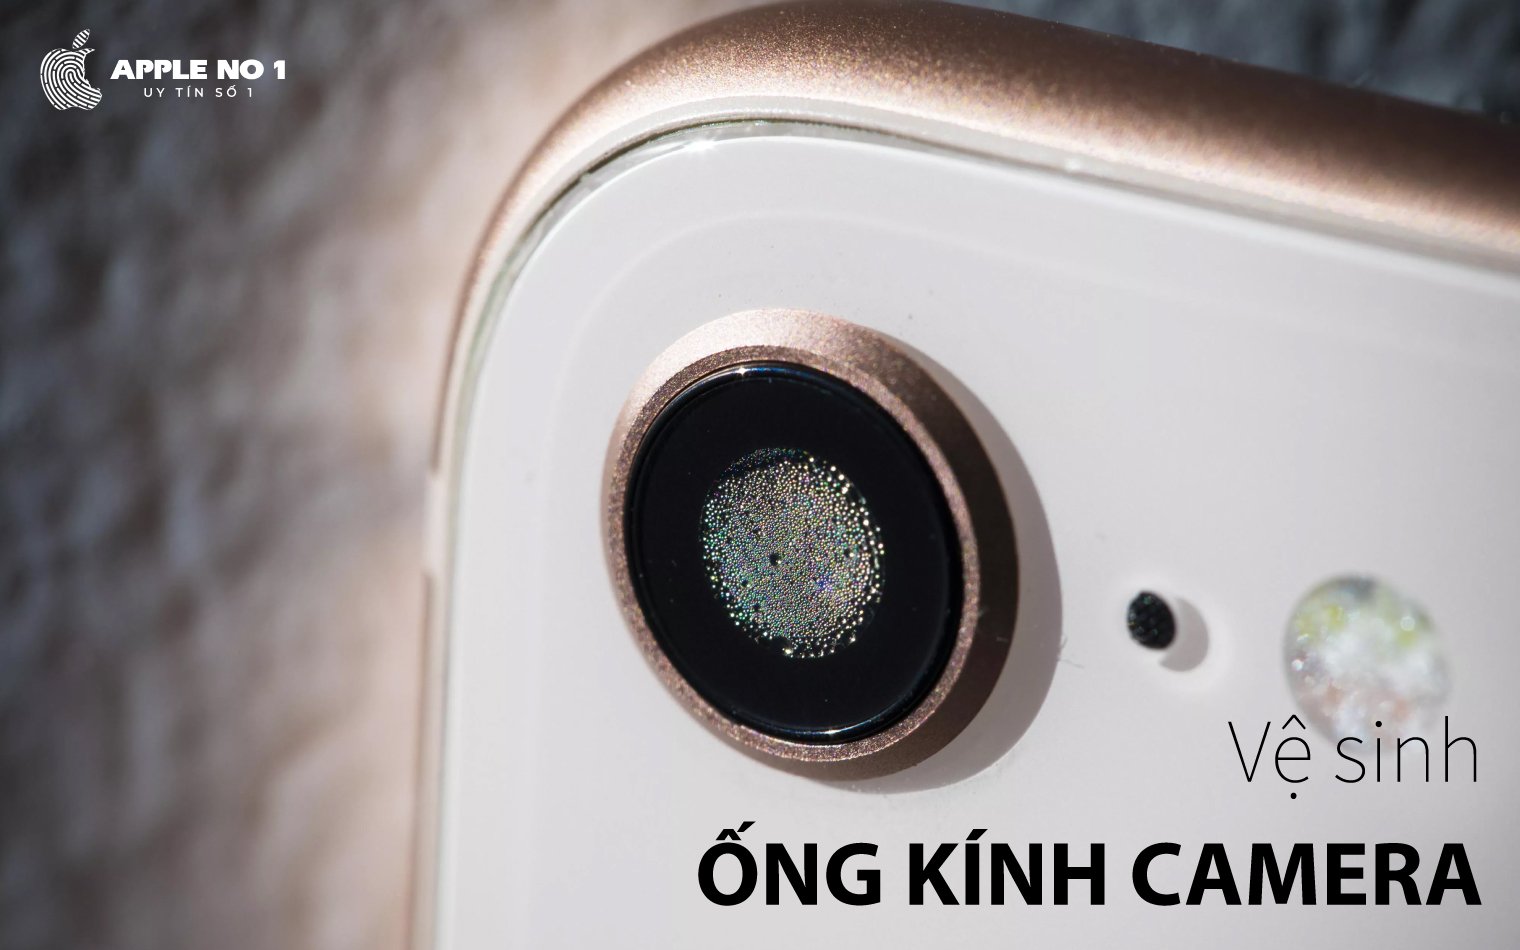 ve sinh ong kinh camera iphone xr